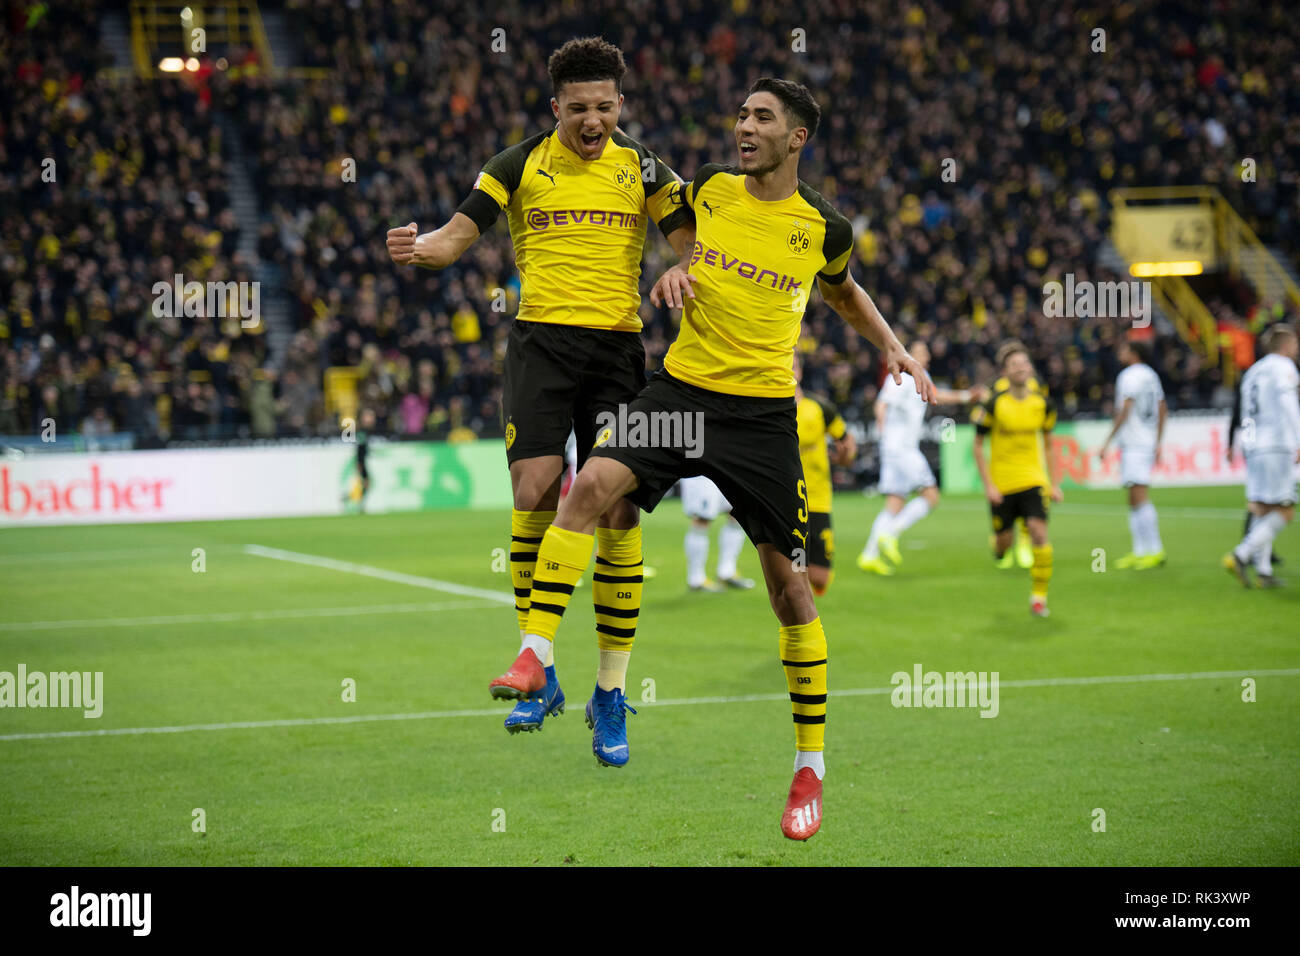 Dortmund, Germany. 09th Feb, 2019. Soccer: Bundesliga, Borussia Dortmund - 1899 Hoffenheim, 21st matchday at Signal Iduna Park: Dortmund's Jadon Sancho (l) and Achraf Hakimi cheer for a goal that was not scored after video evidence. Credit: Bernd Thissen/dpa - IMPORTANT NOTE: In accordance with the requirements of the DFL Deutsche Fußball Liga or the DFB Deutscher Fußball-Bund, it is prohibited to use or have used photographs taken in the stadium and/or the match in the form of sequence images and/or video-like photo sequences./dpa/Alamy Live News Stock Photo